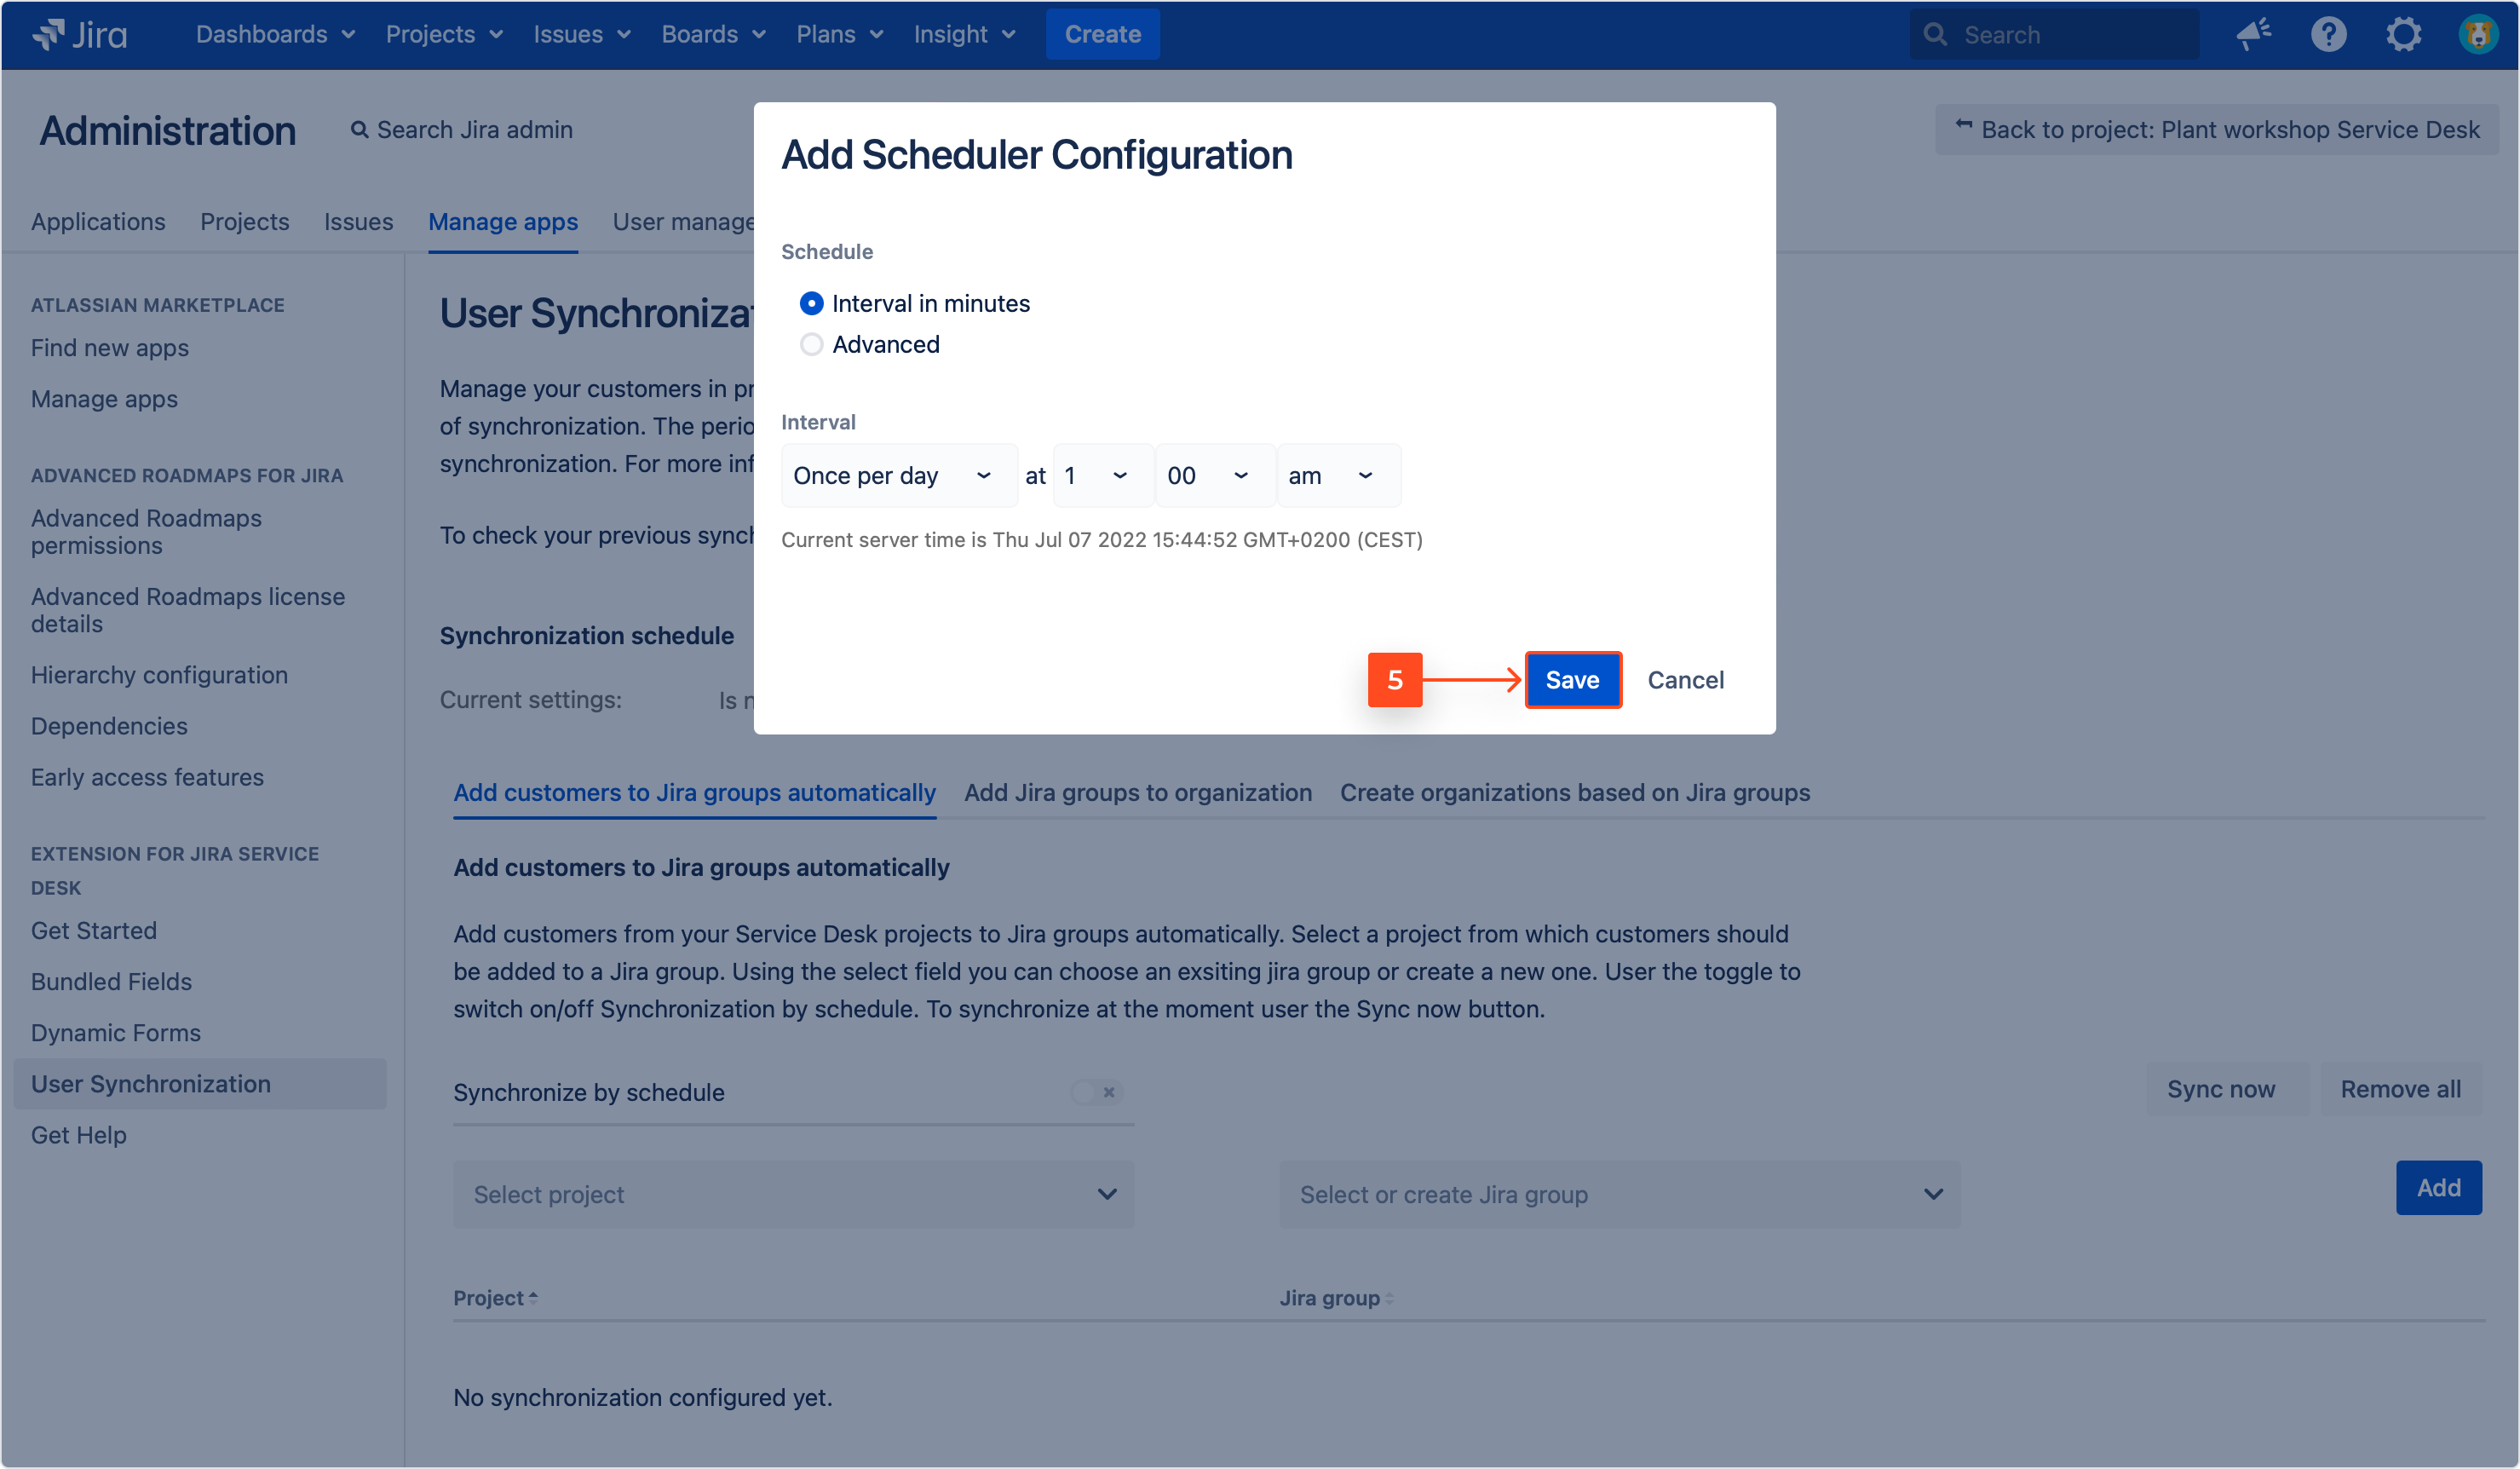 Configuring organizations and Jira groups synchronization with Extension for Jira Service Management by adding scheduler configuration